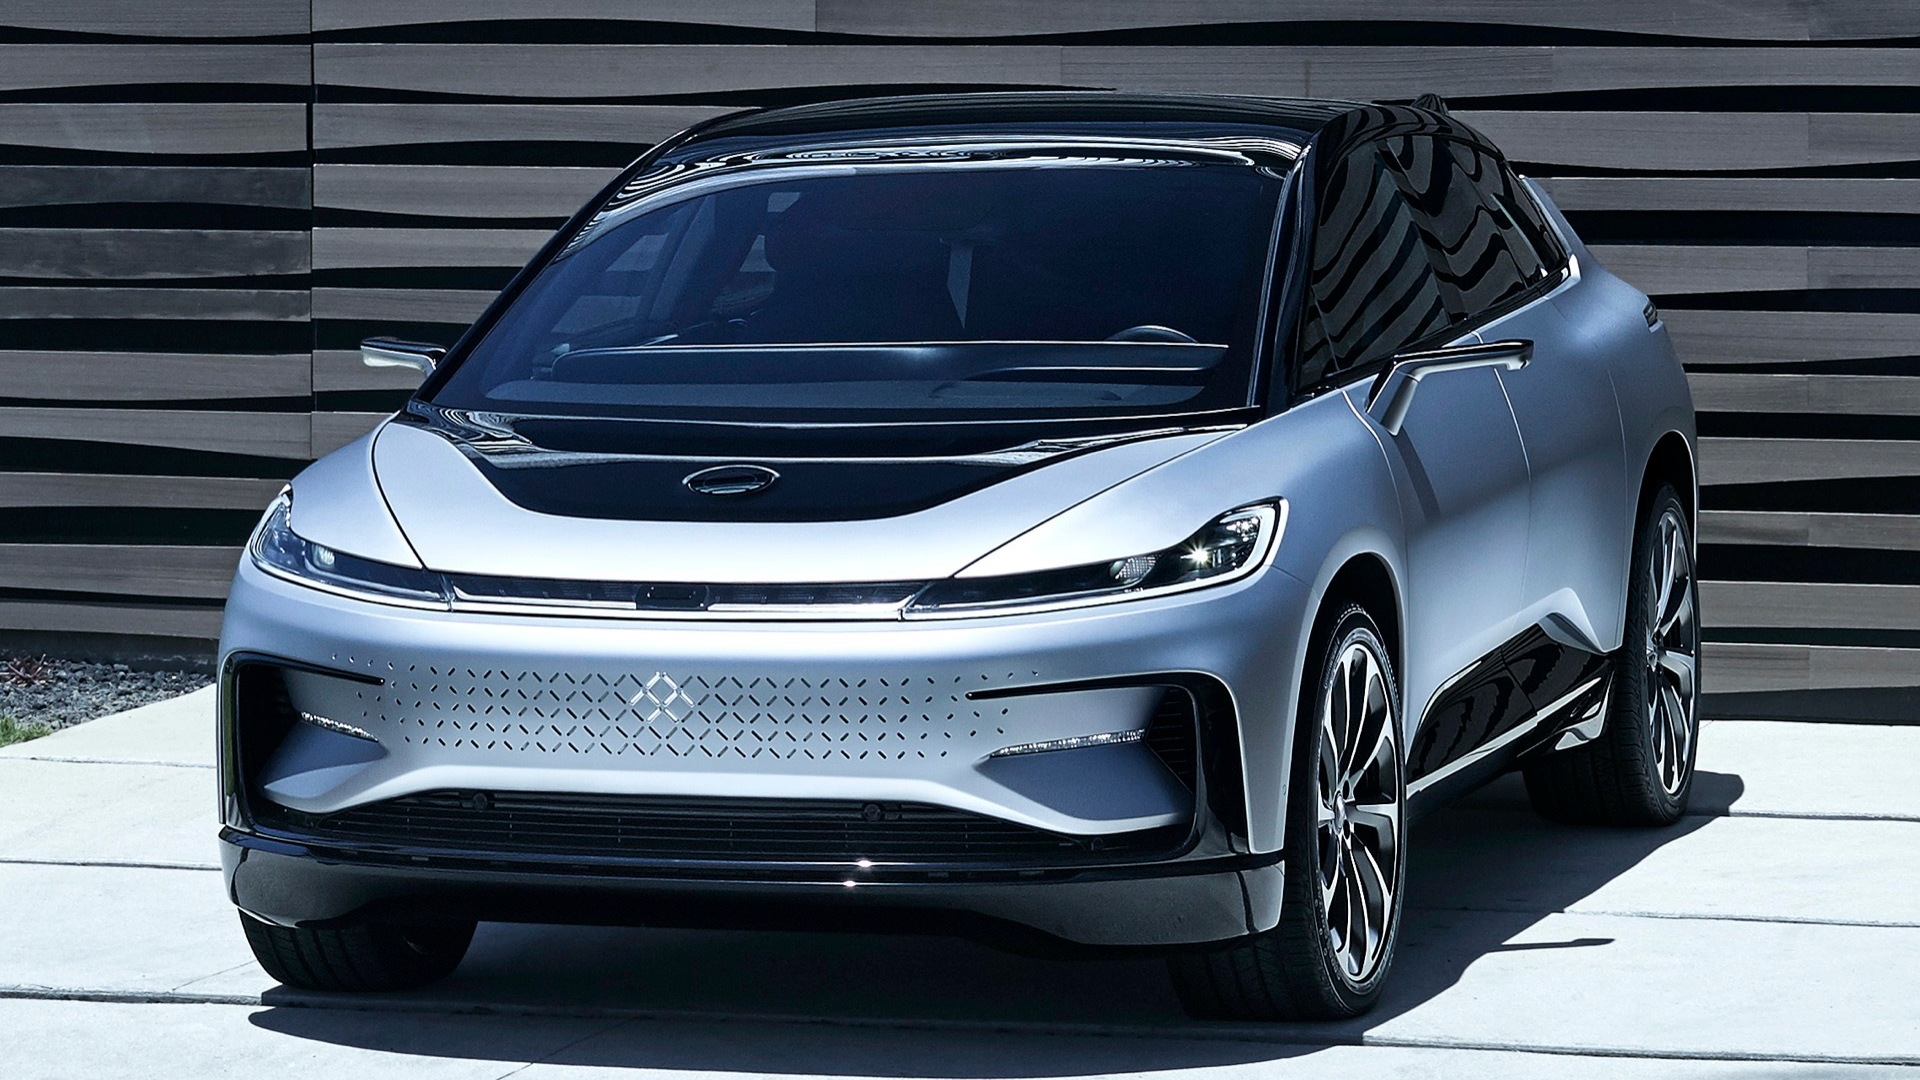 Faraday Future shows off FF91 videocall capability ahead of SPAC and